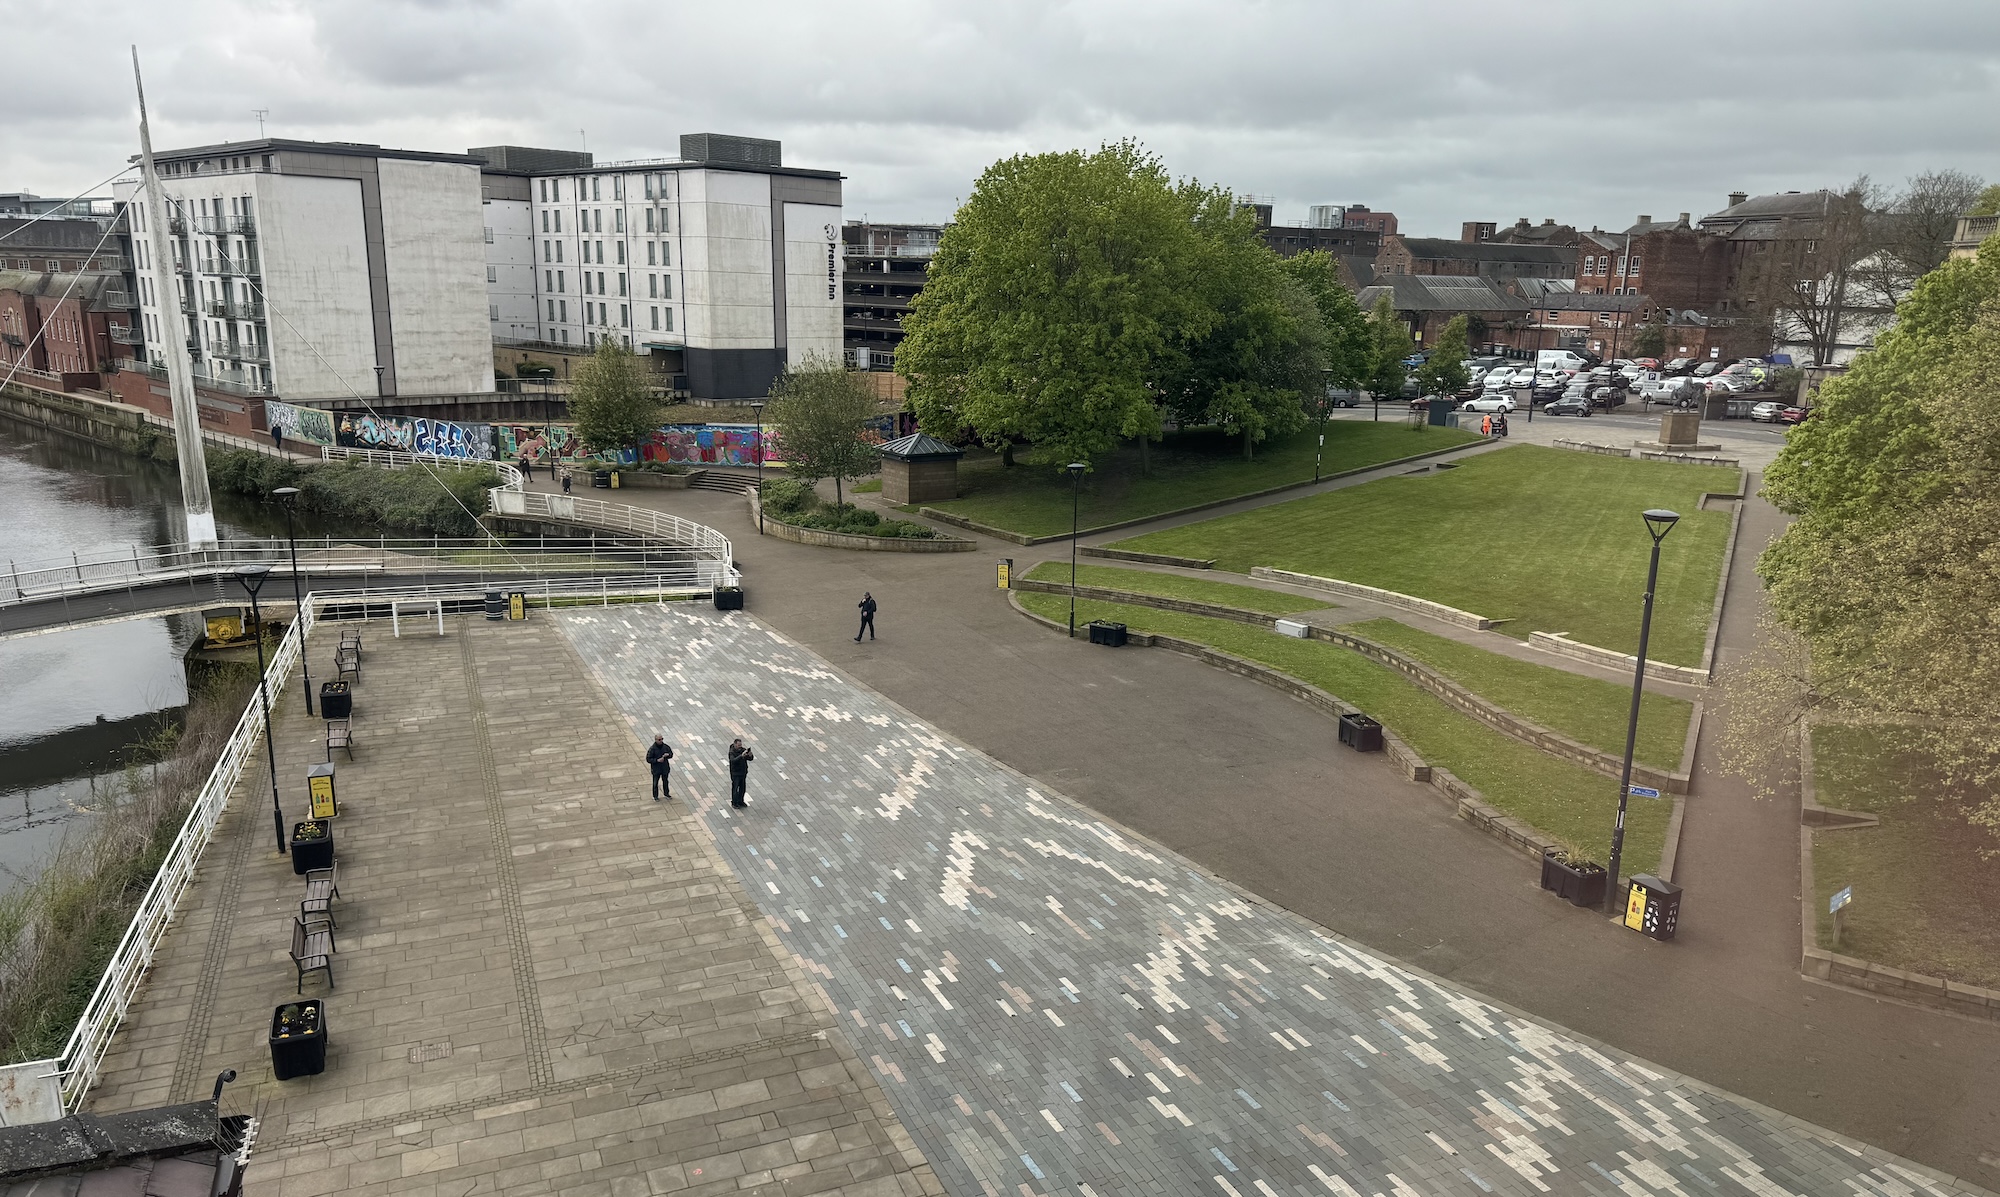 A view from the upper floors of the Silk Mill showing Cathederal Green and the area around the River Derwent.